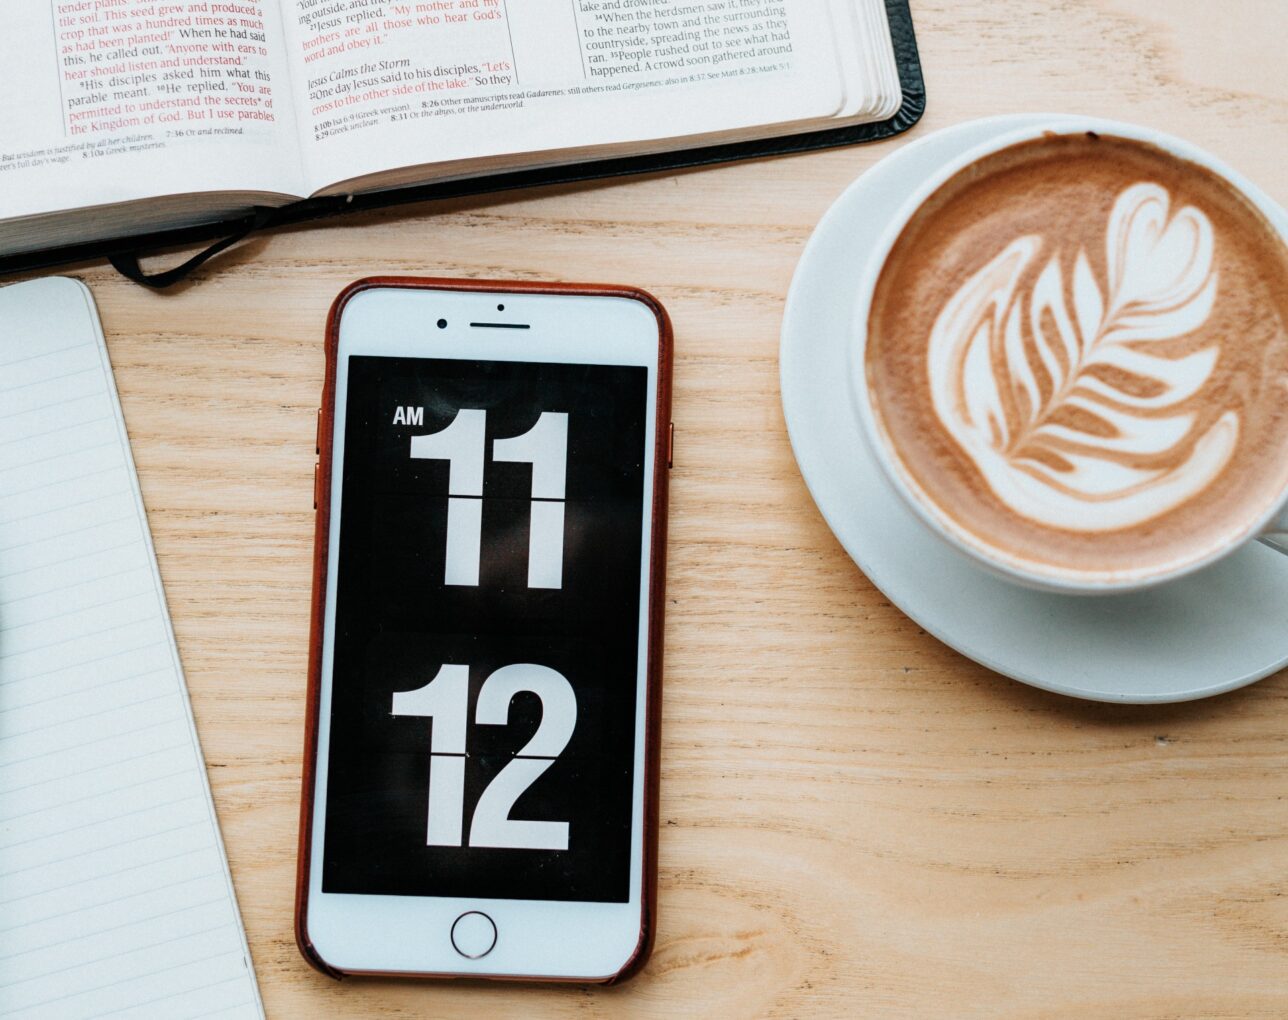 The clock app open on an iPhone next to a latte.